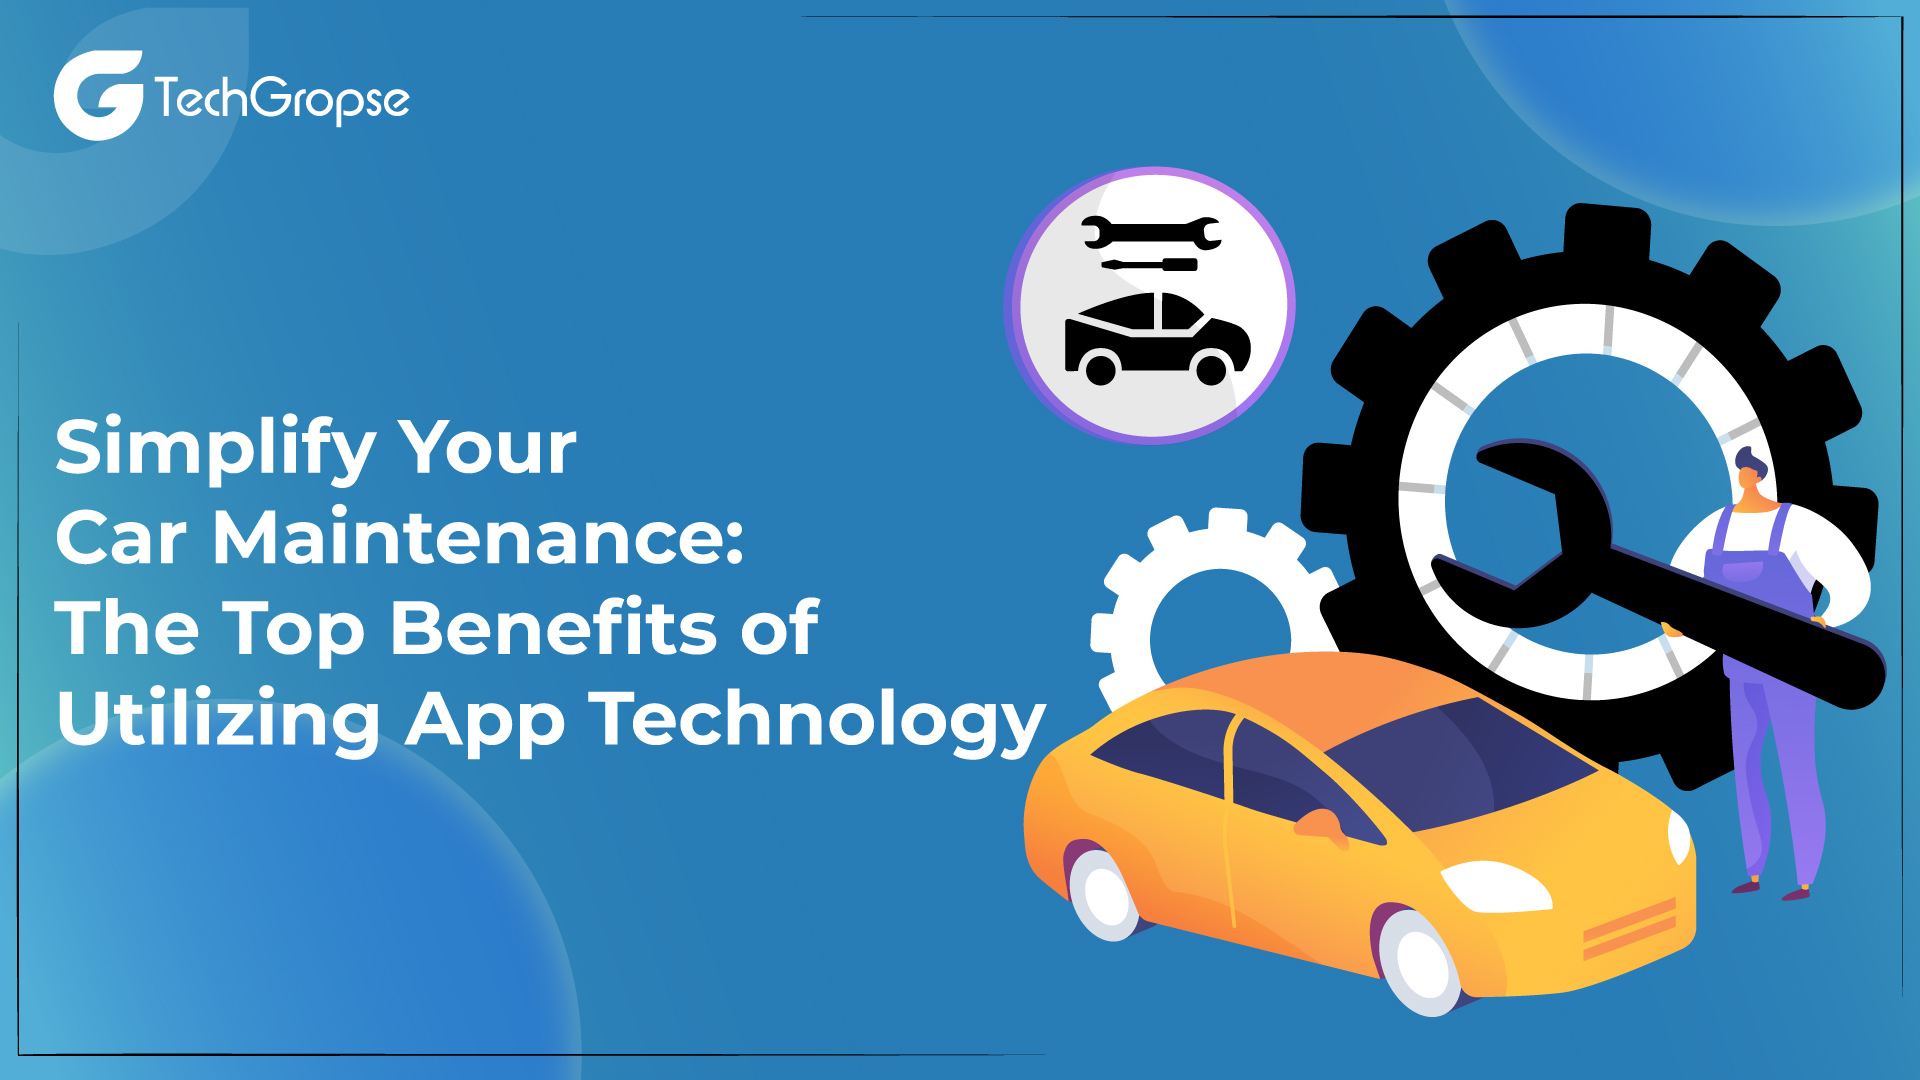 Simplify Your Car Maintenance: The Top Benefits of Utilizing App Technology